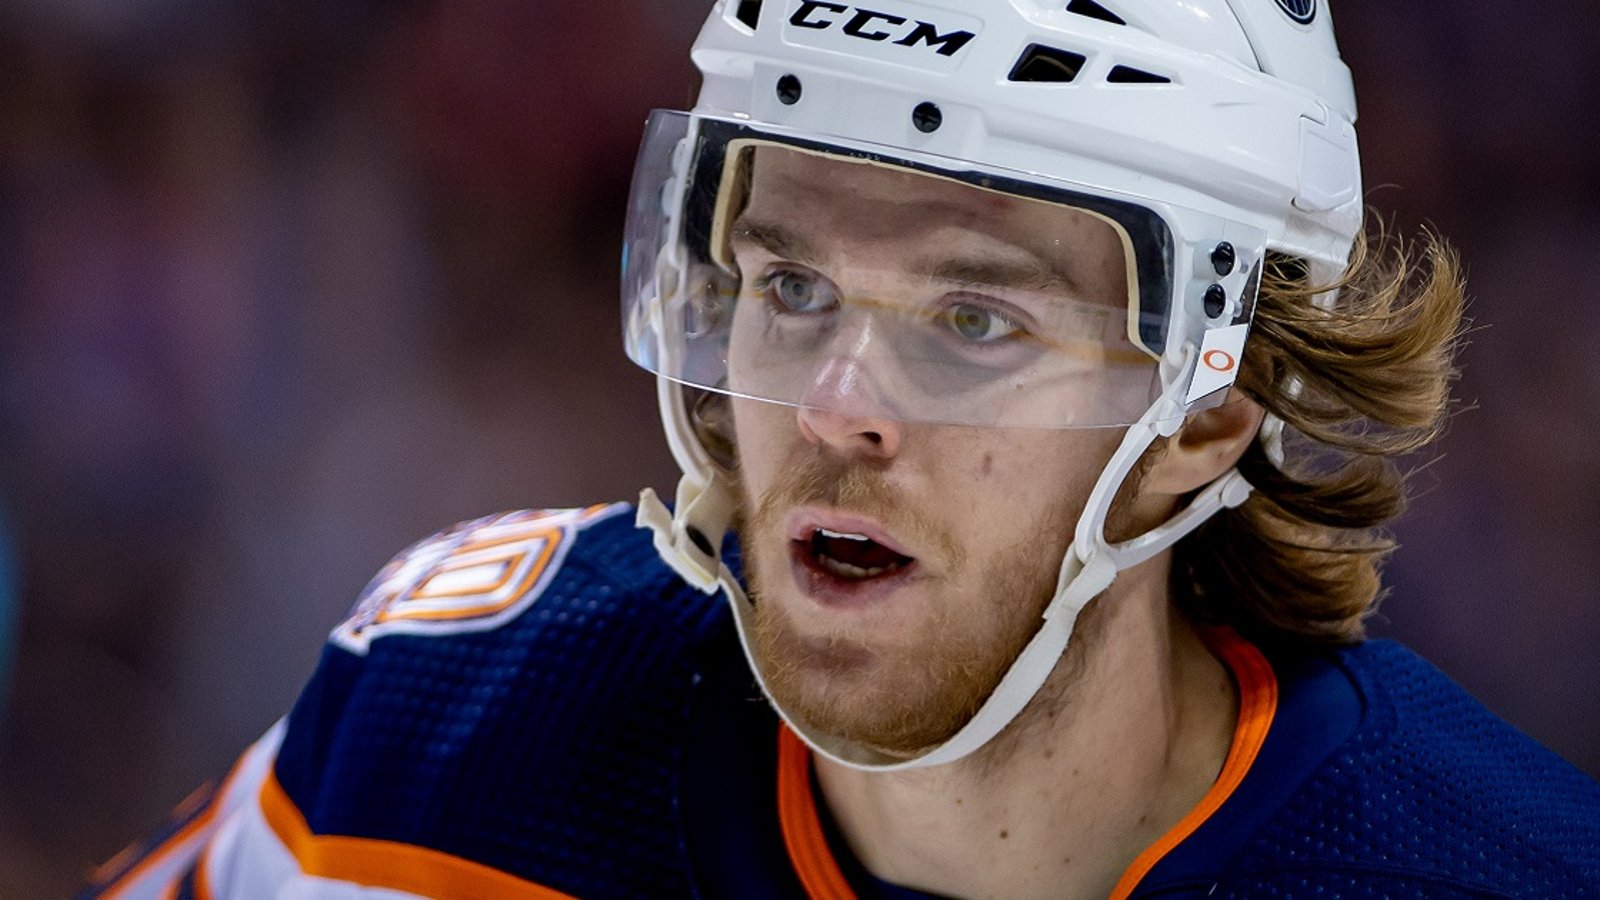 Connor McDavid has lost in the fastest skater challenge to an Oilers teammate.